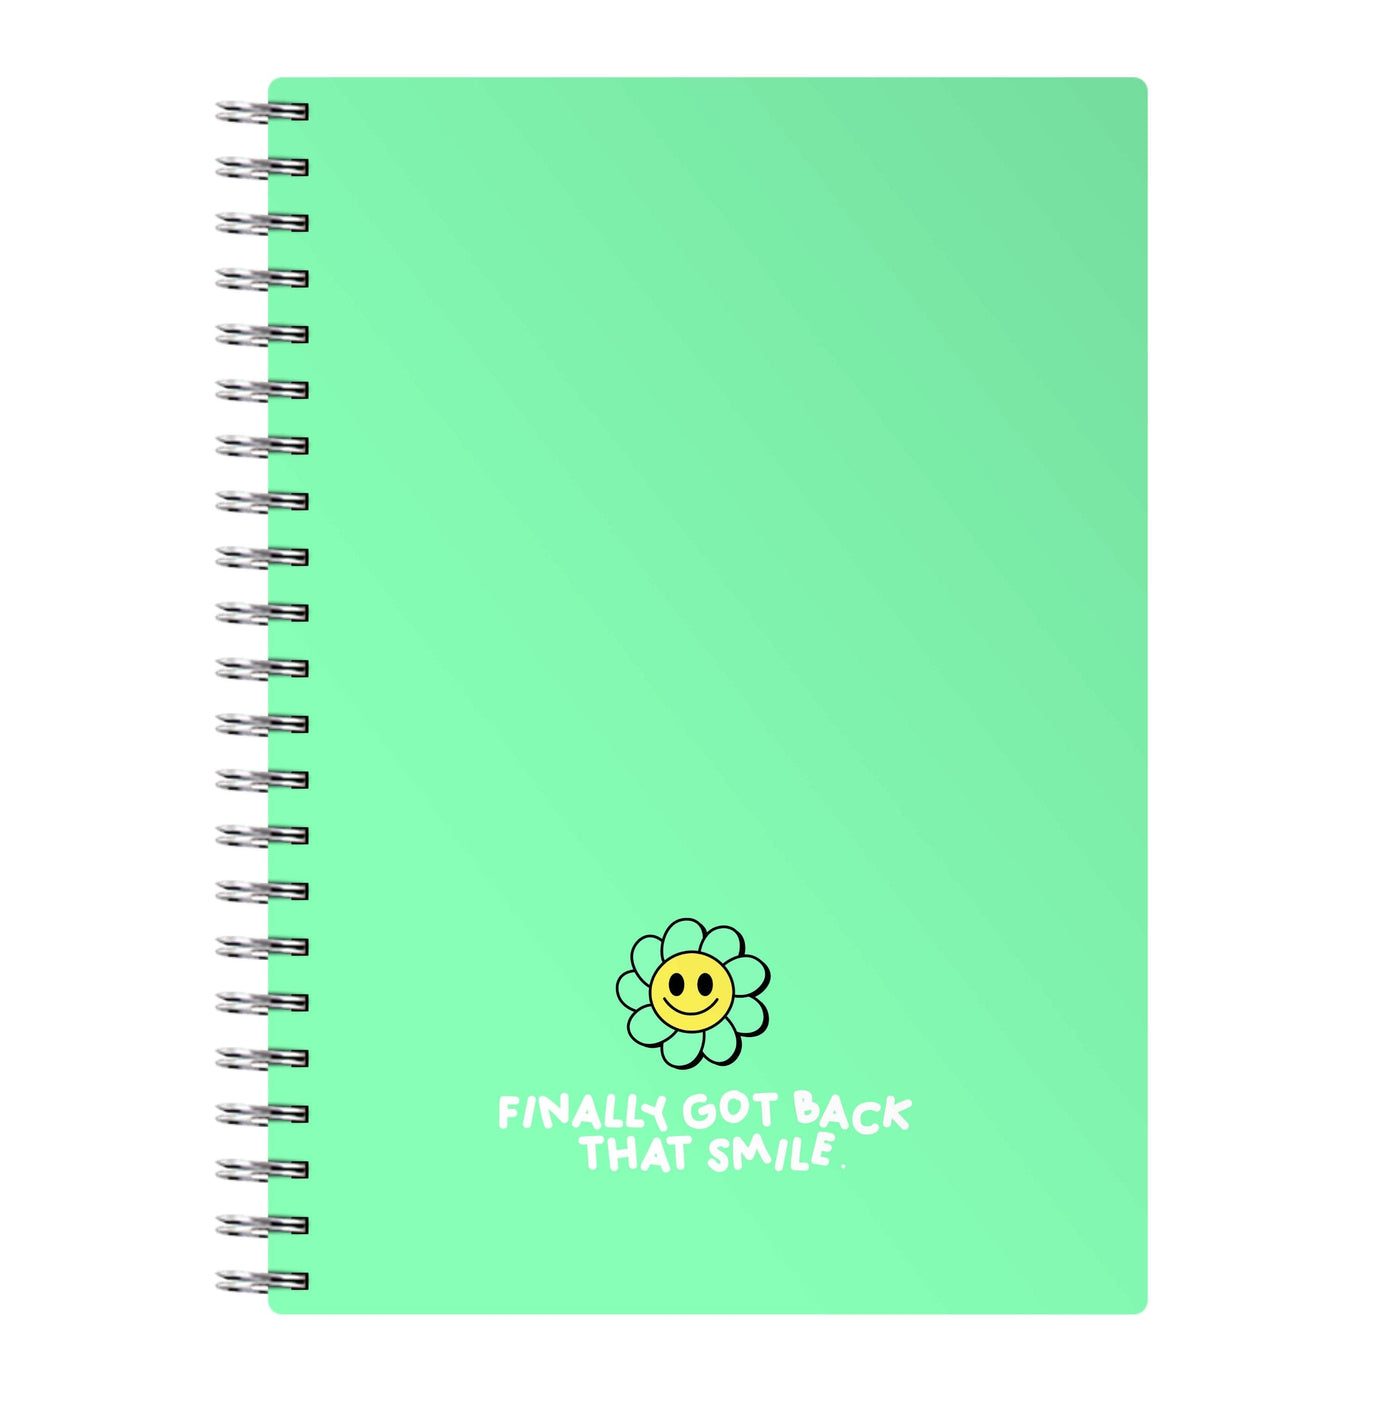 Finally Got Back That Smile - Katy Perry Notebook